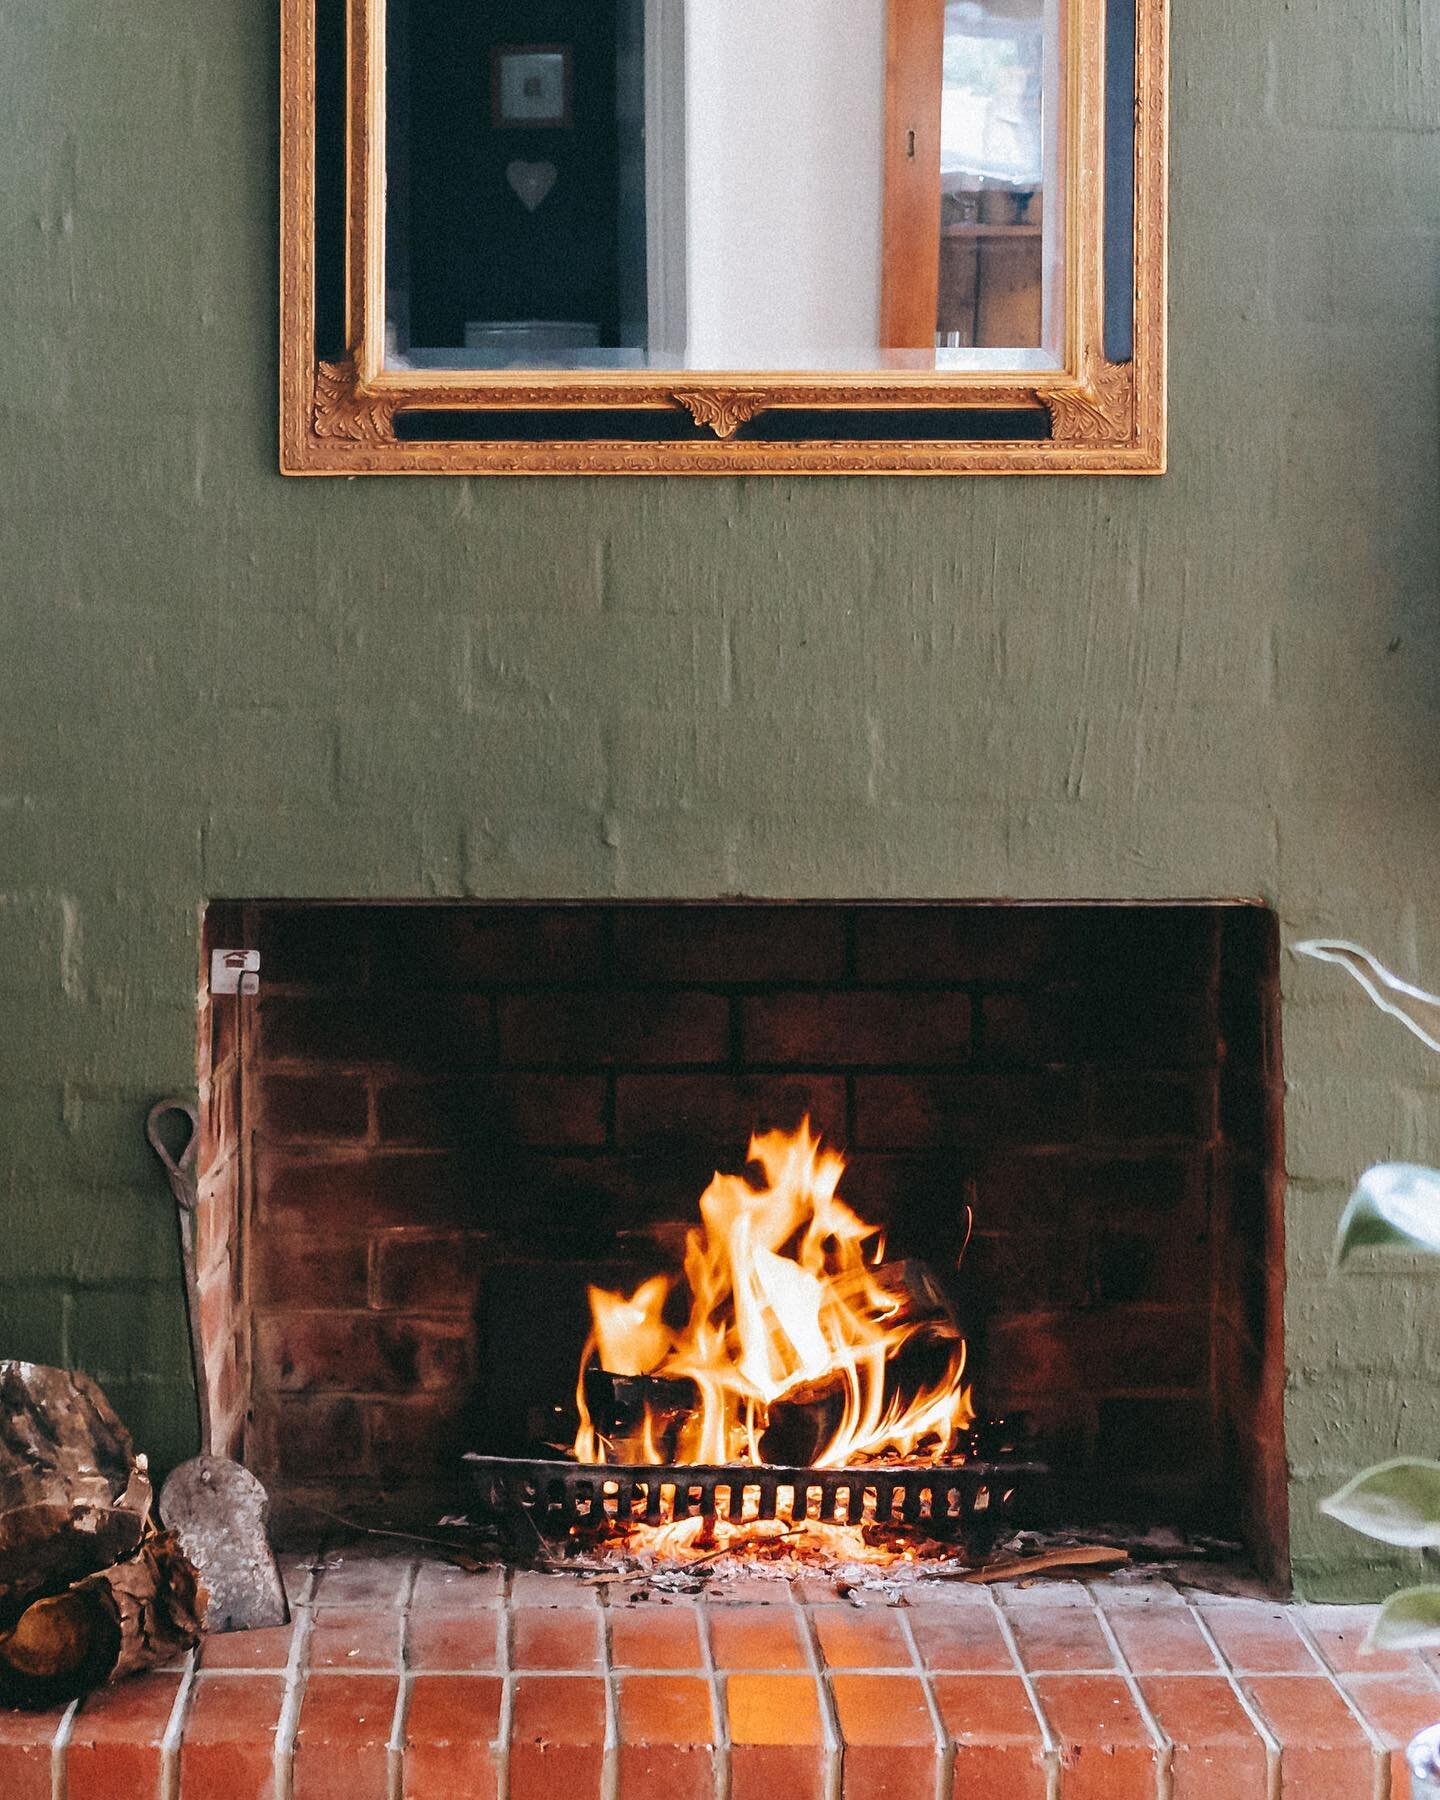 Heading into cosy fireplace season, and Elsewhere has not only 1 but 2 to choose from 🔥